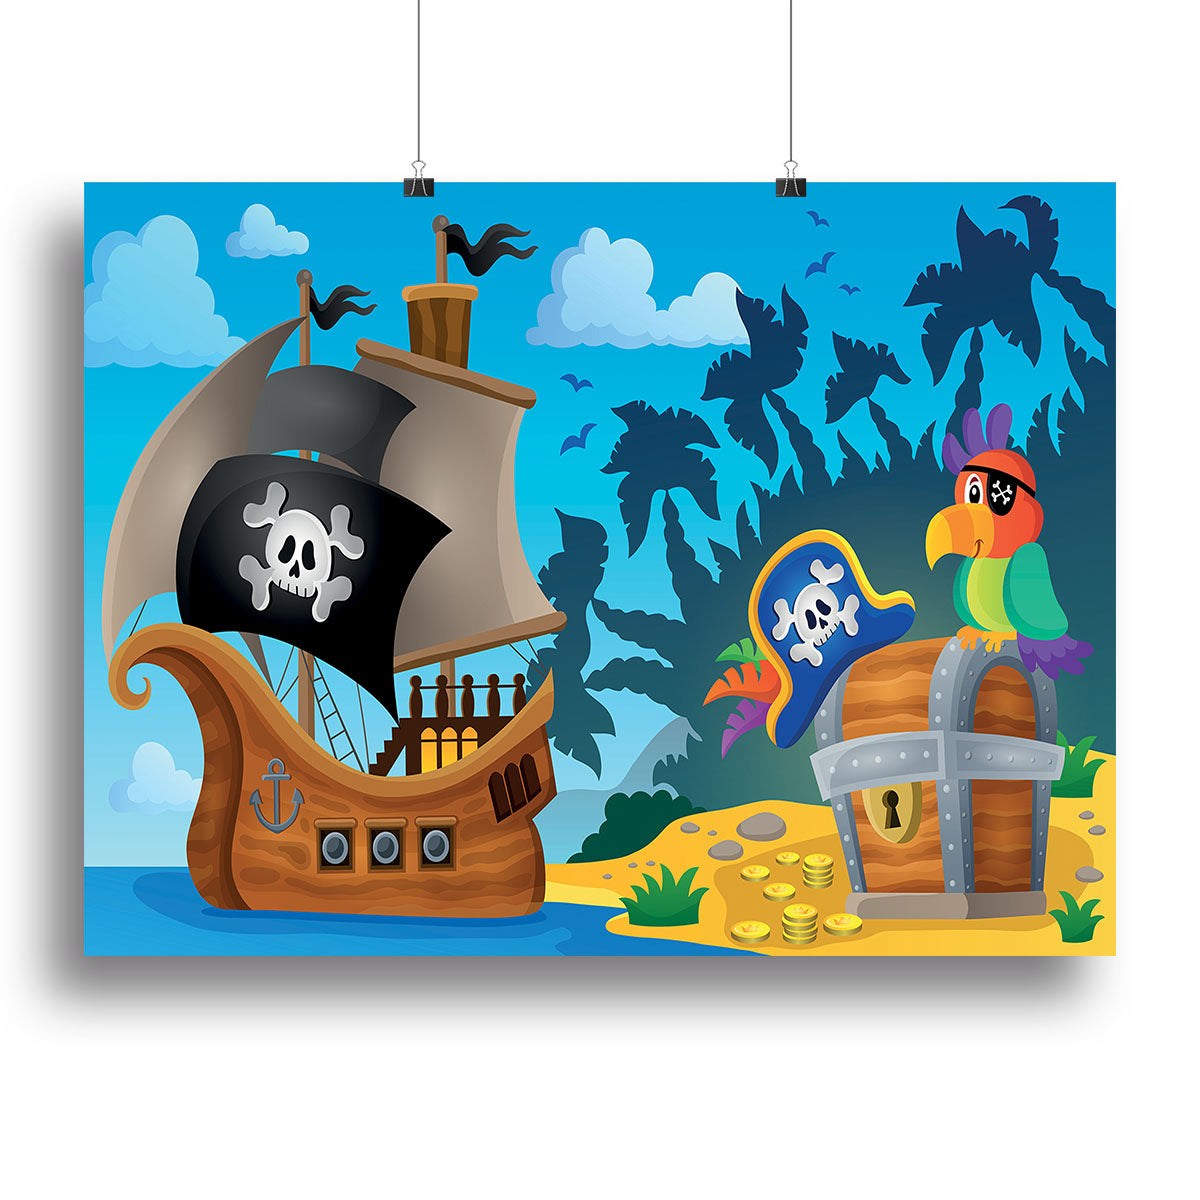 Pirate ship topic image 6 Canvas Print or Poster - Canvas Art Rocks - 2